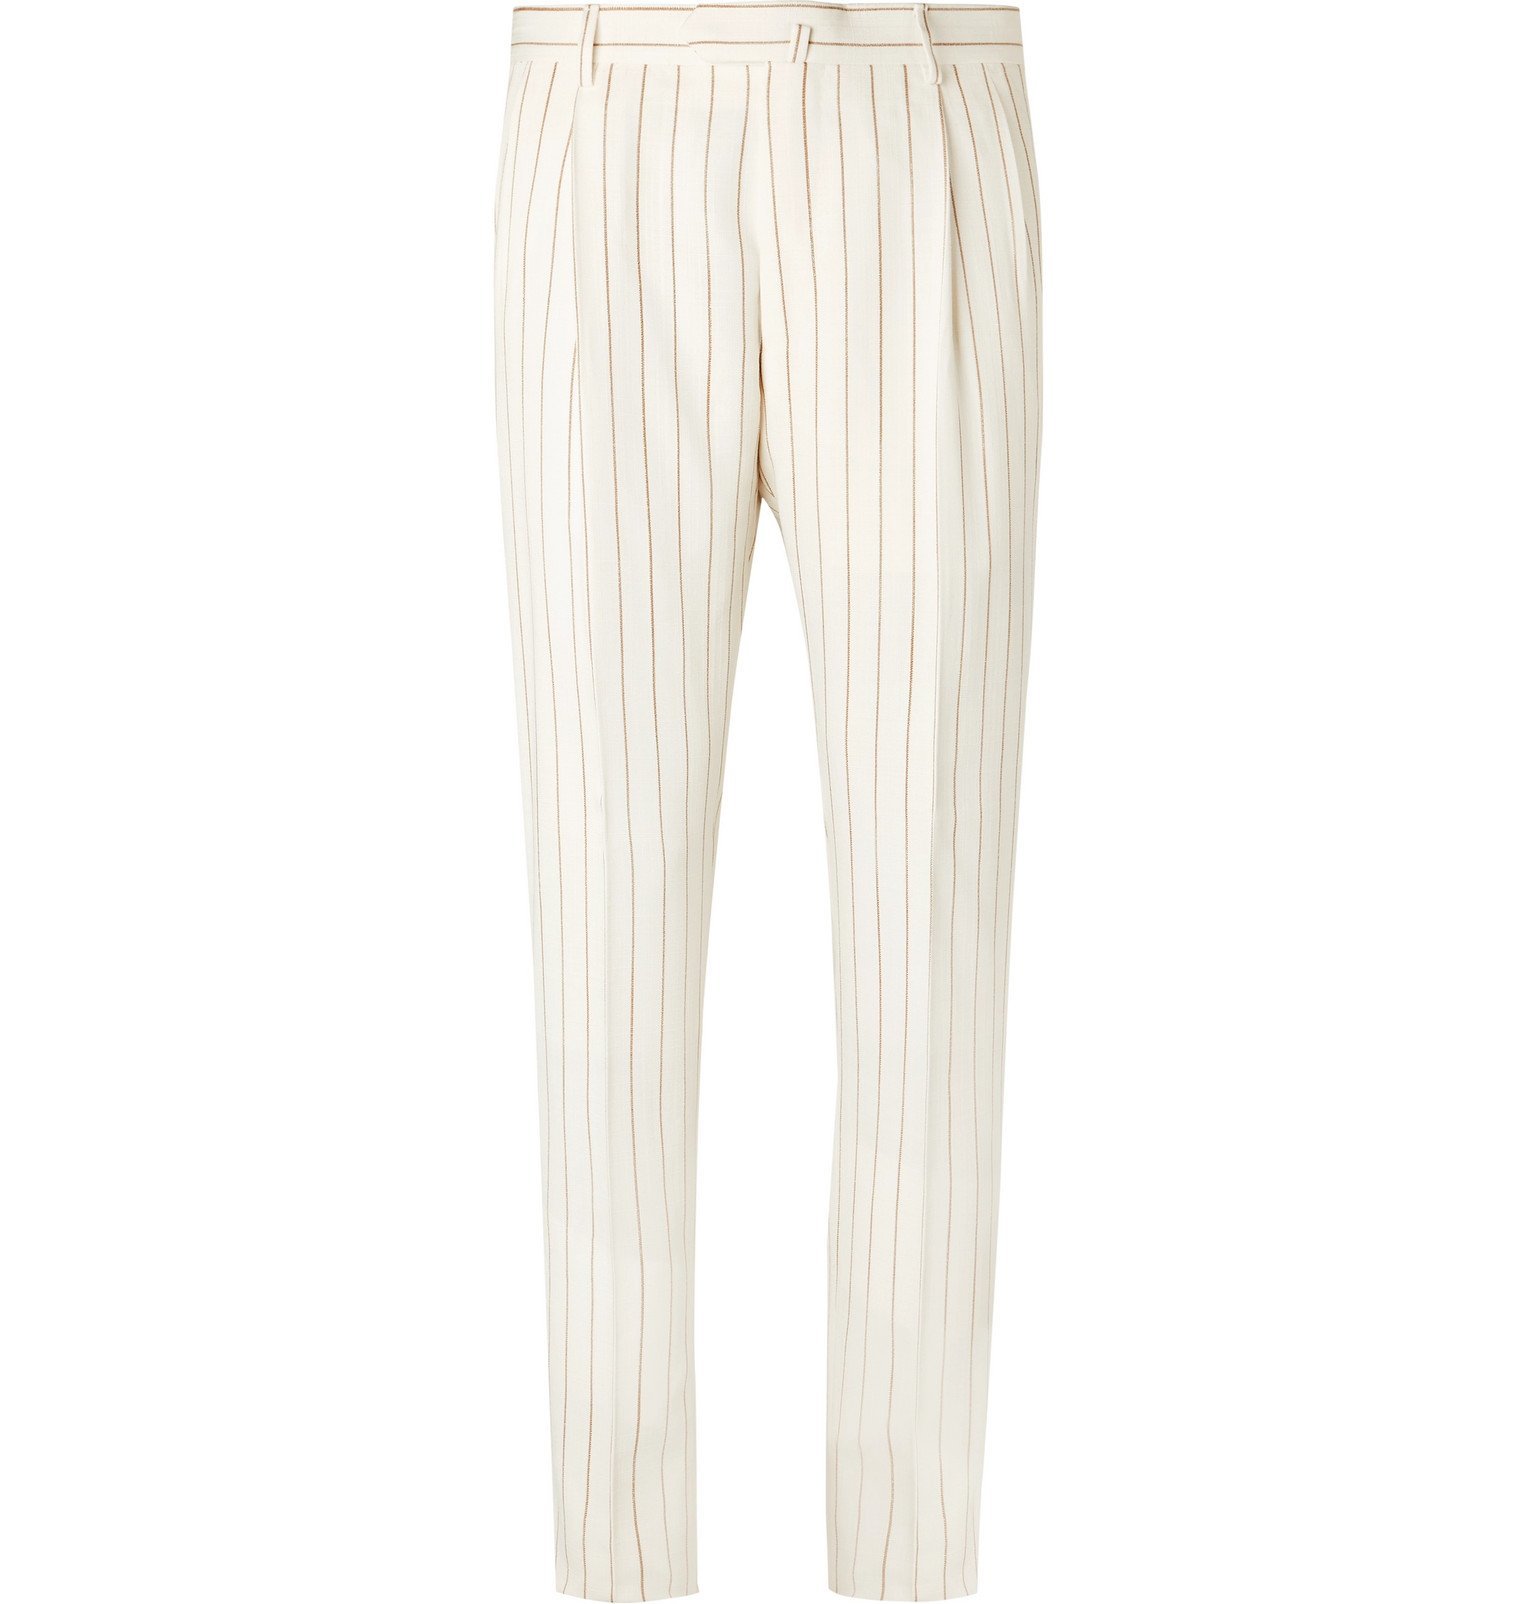 Odyssee - Ivory Monroe Striped Hopsack Suit Trousers - Neutrals Odyssee